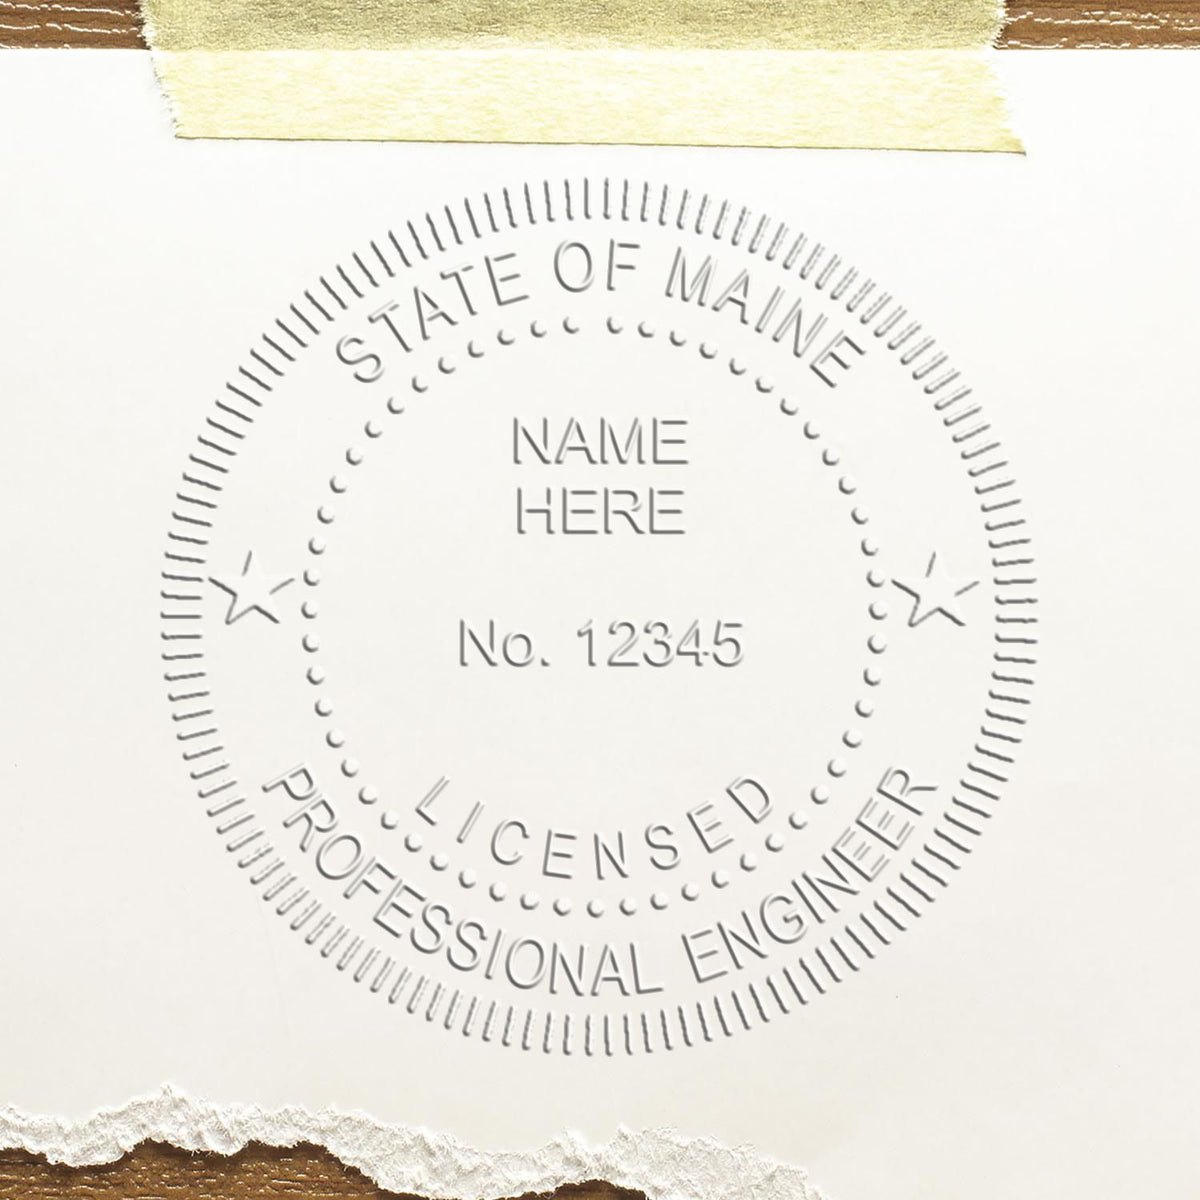 A stamped impression of the Soft Maine Professional Engineer Seal in this stylish lifestyle photo, setting the tone for a unique and personalized product.